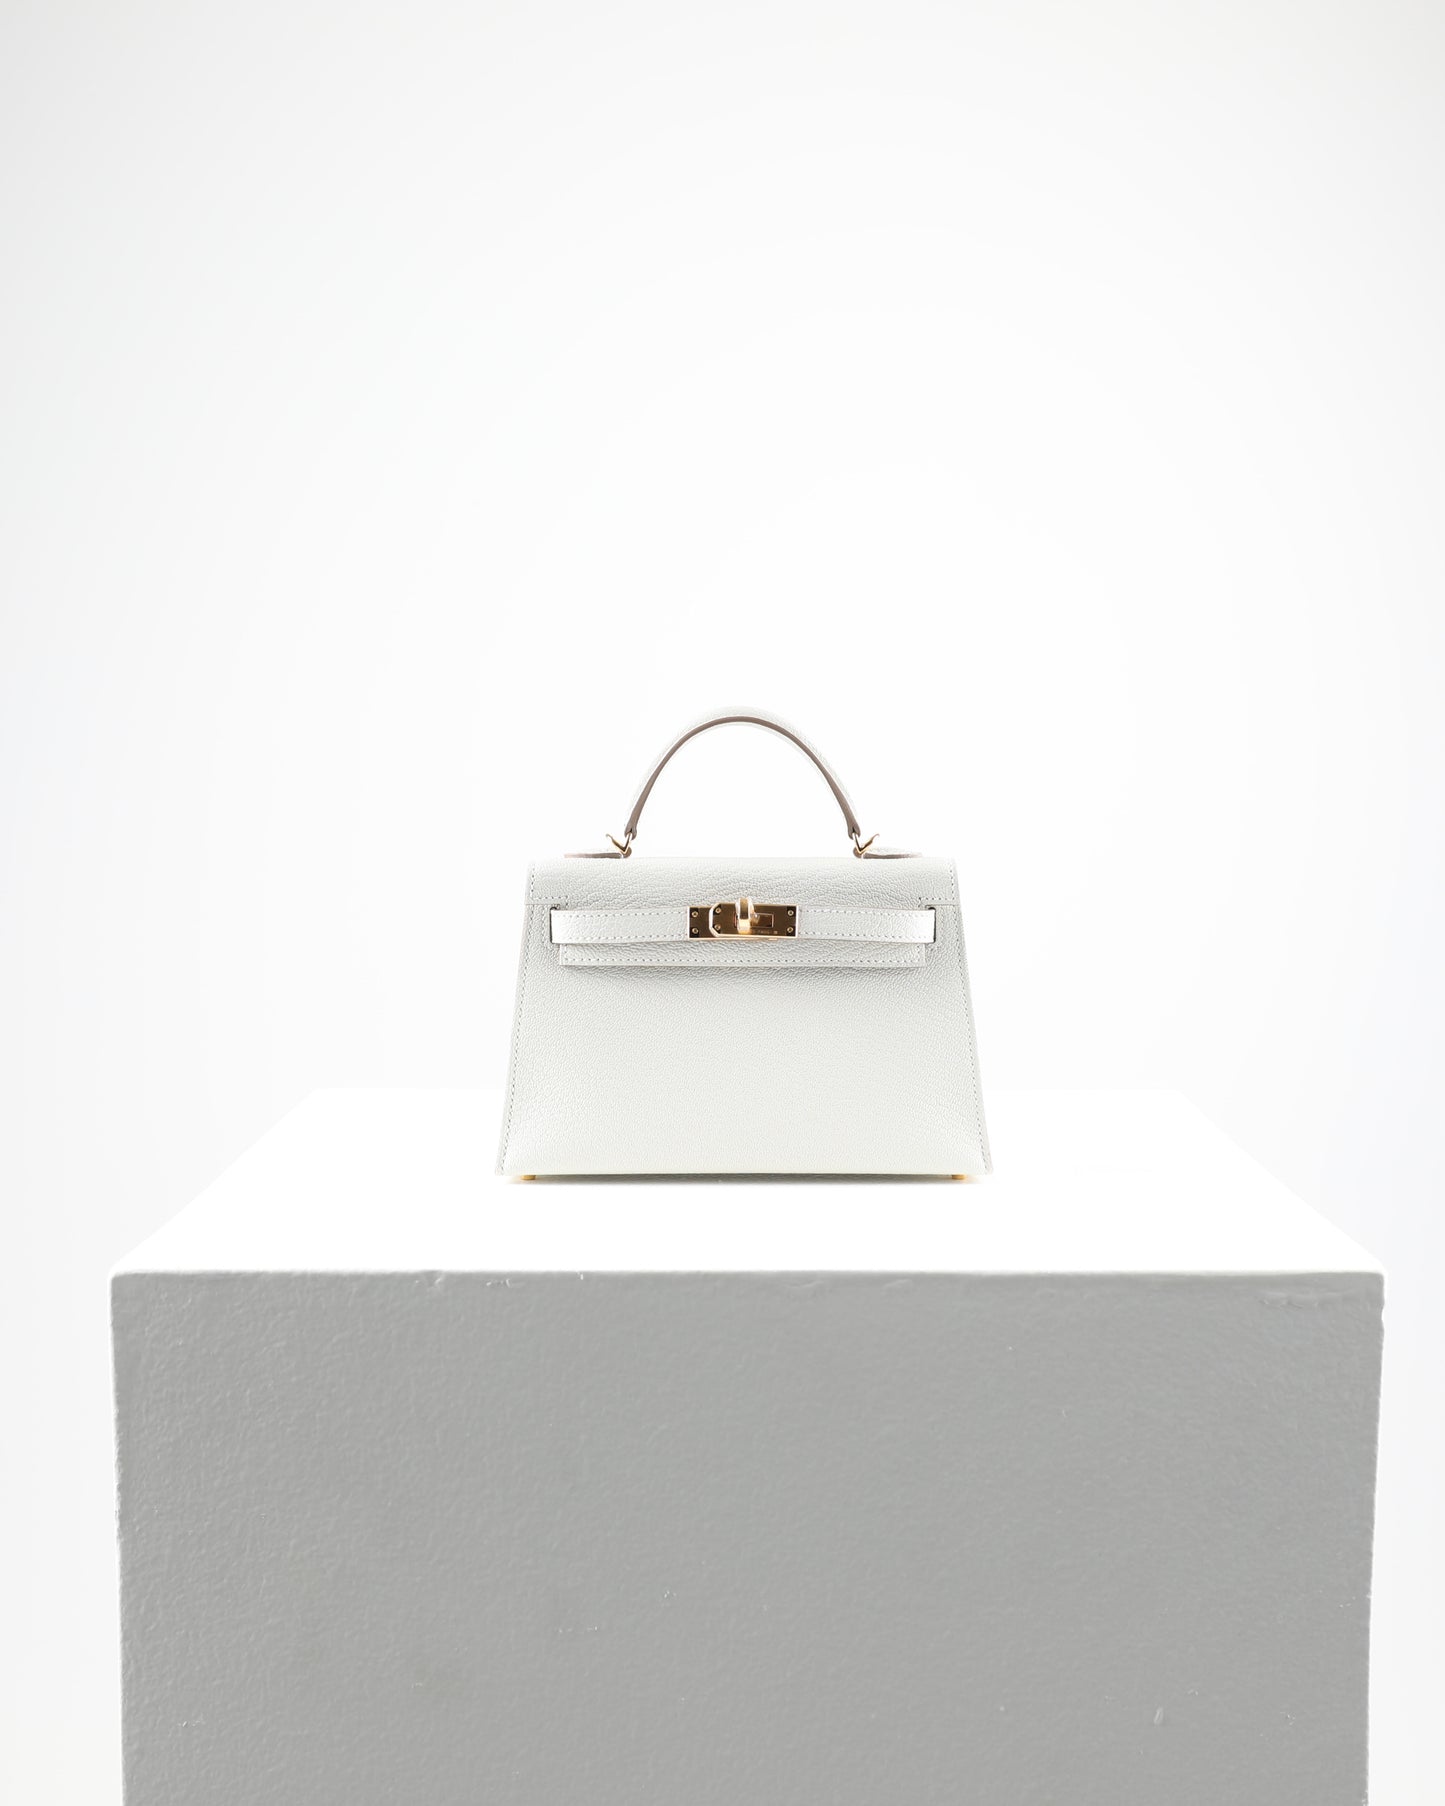 Kelly 20 Sellier Mushroom in Chevre Leather with Gold Hardware